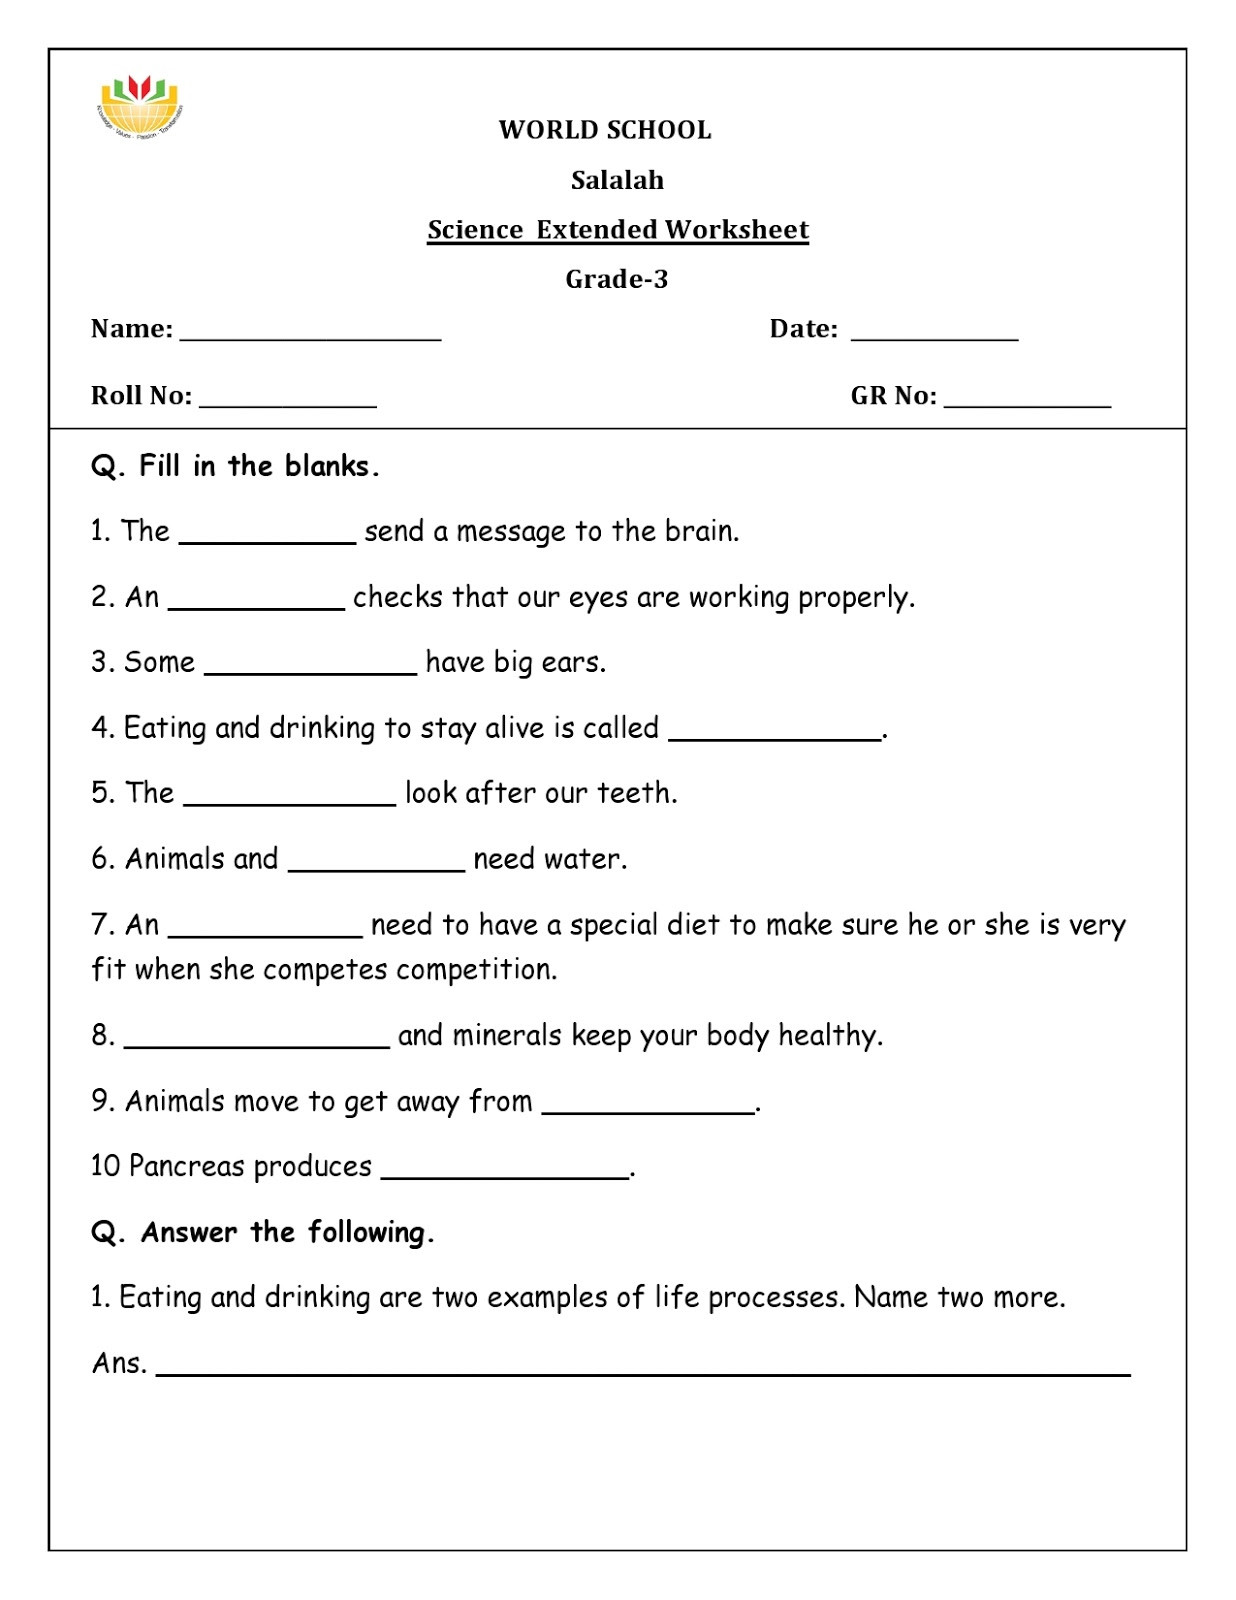 Second Grade Science Worksheets Free Science Worksheets for Grade 2 to Educations Science